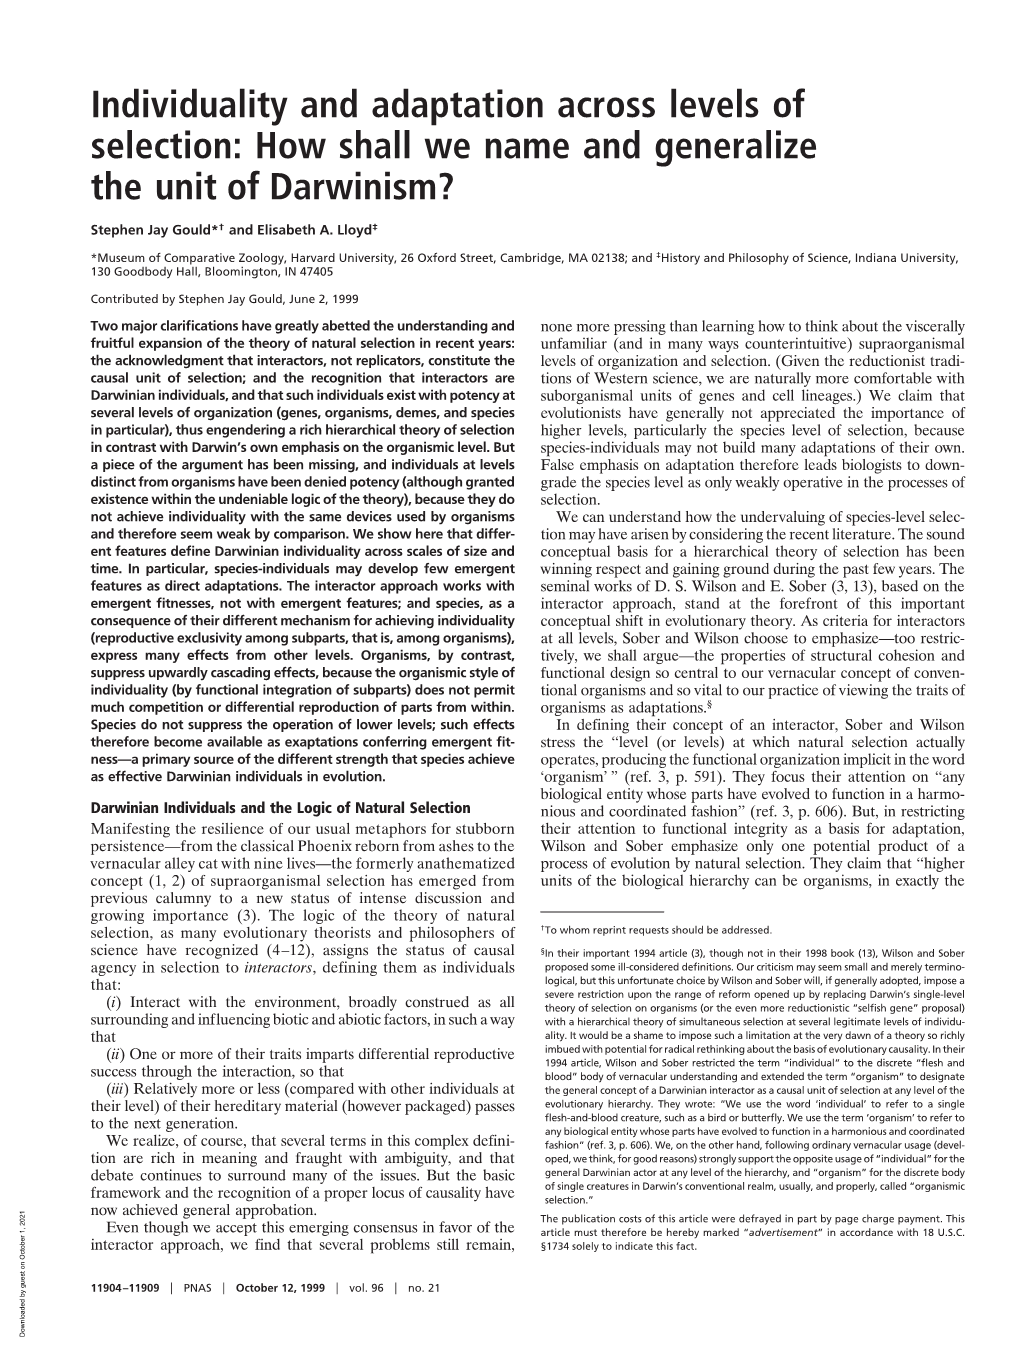 Individuality and Adaptation Across Levels of Selection: How Shall We Name and Generalize the Unit of Darwinism?